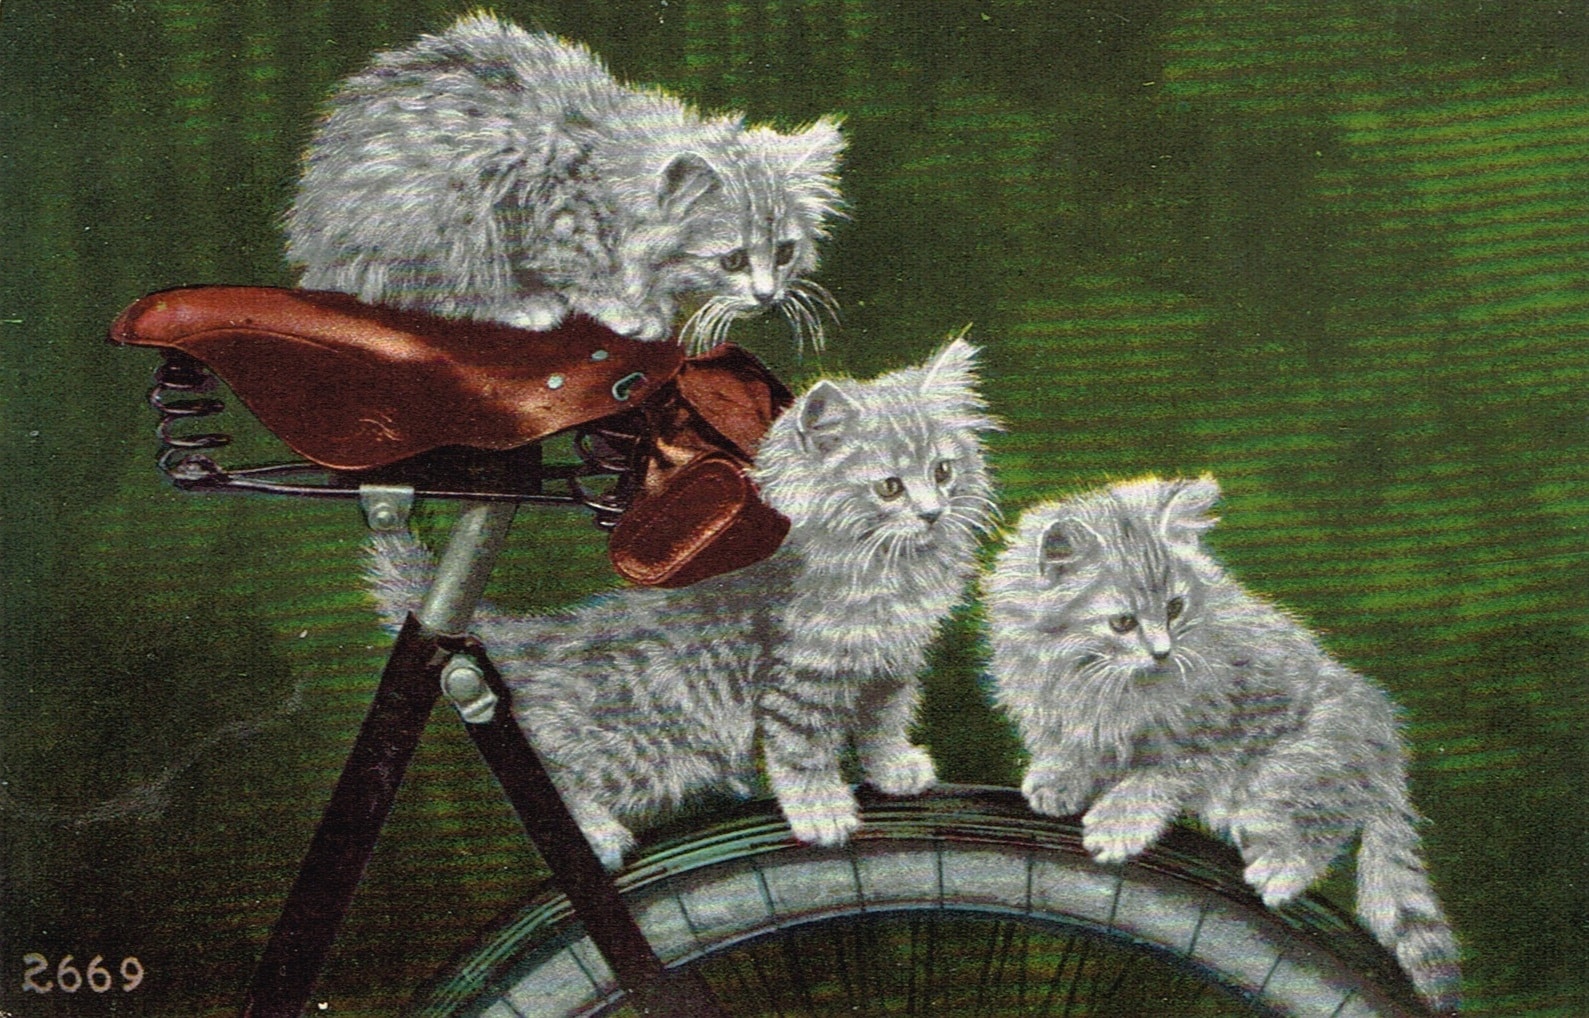 HOW DO I FIND THE RIGHT BIKE SEAT FOR ME? – Three cats on a bicycle answer the question by helping you to find your purrfect saddle.